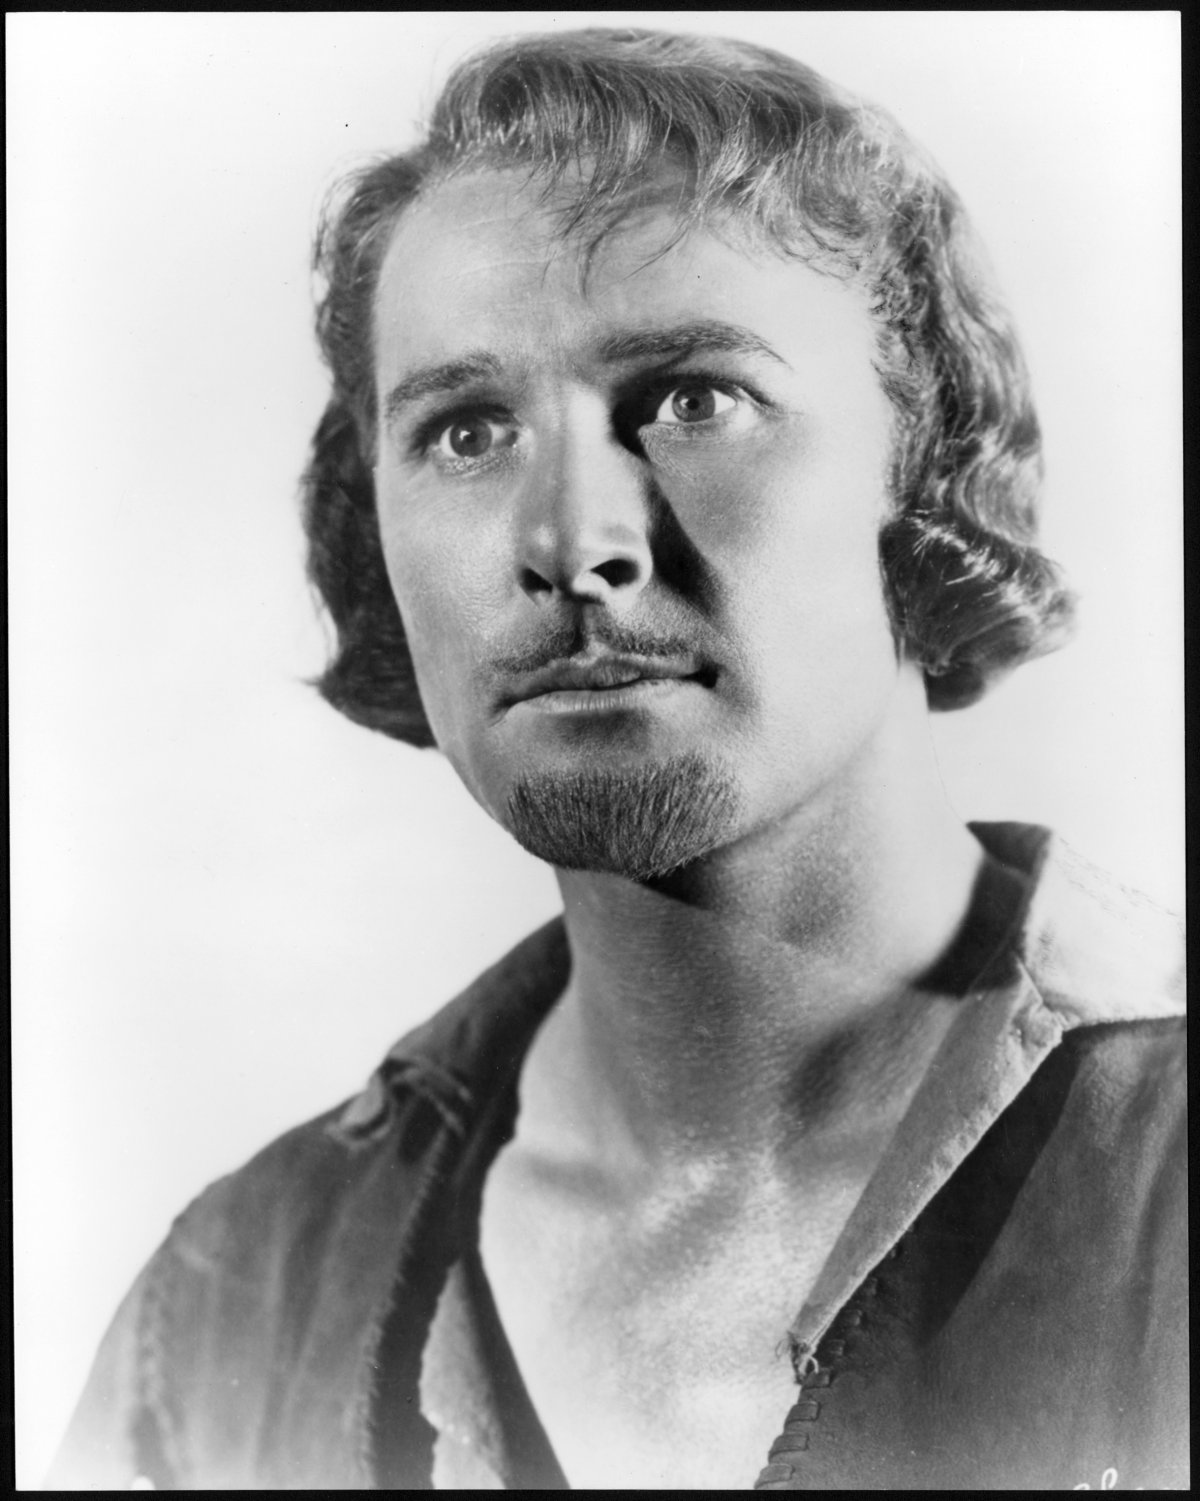 A black and white photograph of a man. He has an unbuttoned shirt showing his chest. He is staring off camera. He has a well groomed pencil moustache and a goatee. He has wavy blind hair.